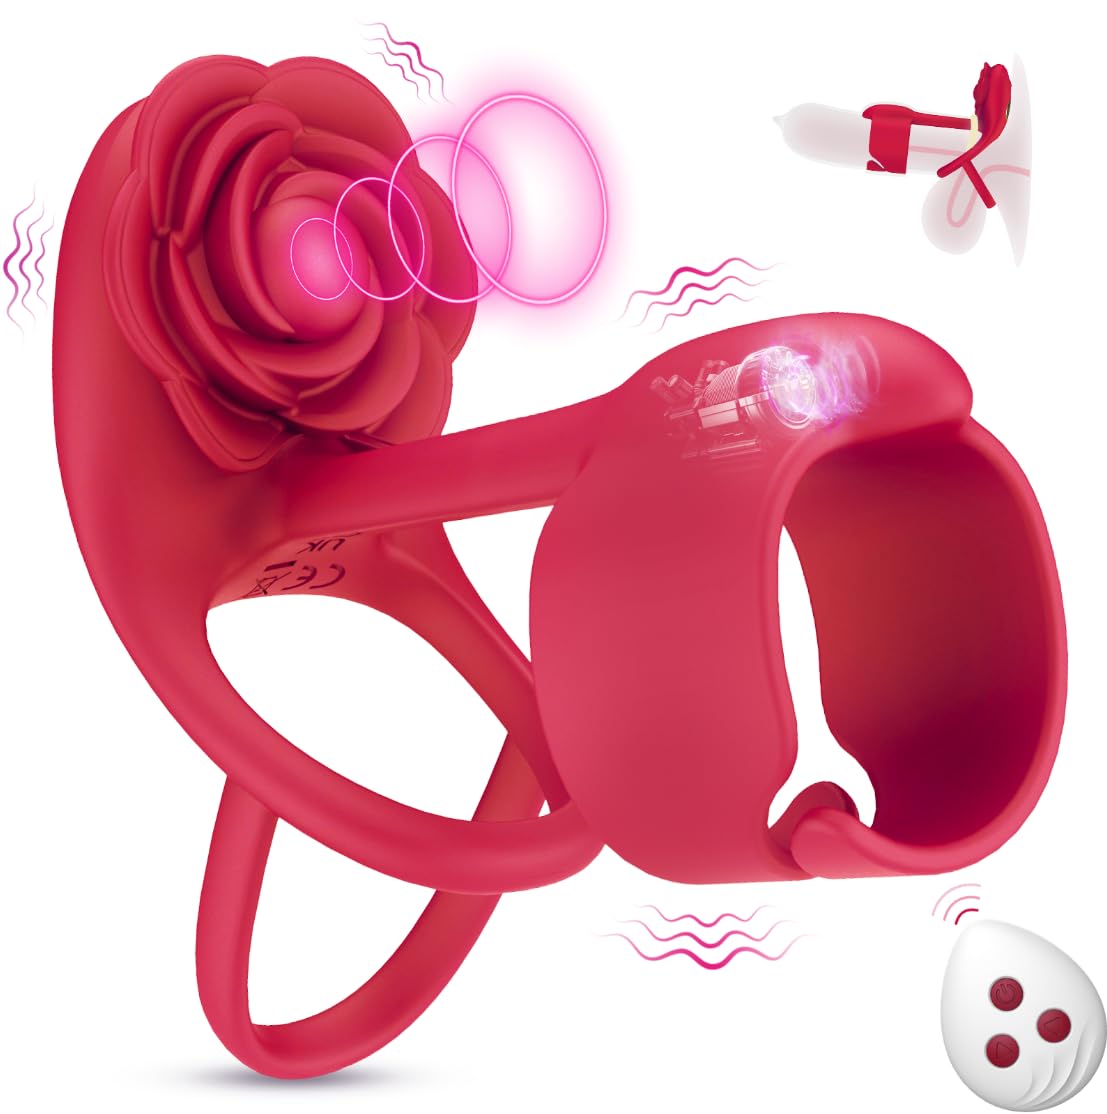 Lurevibe - 3 IN 1 Vibrating Rose Penis Ring with 10 Vibration - Lurevibe